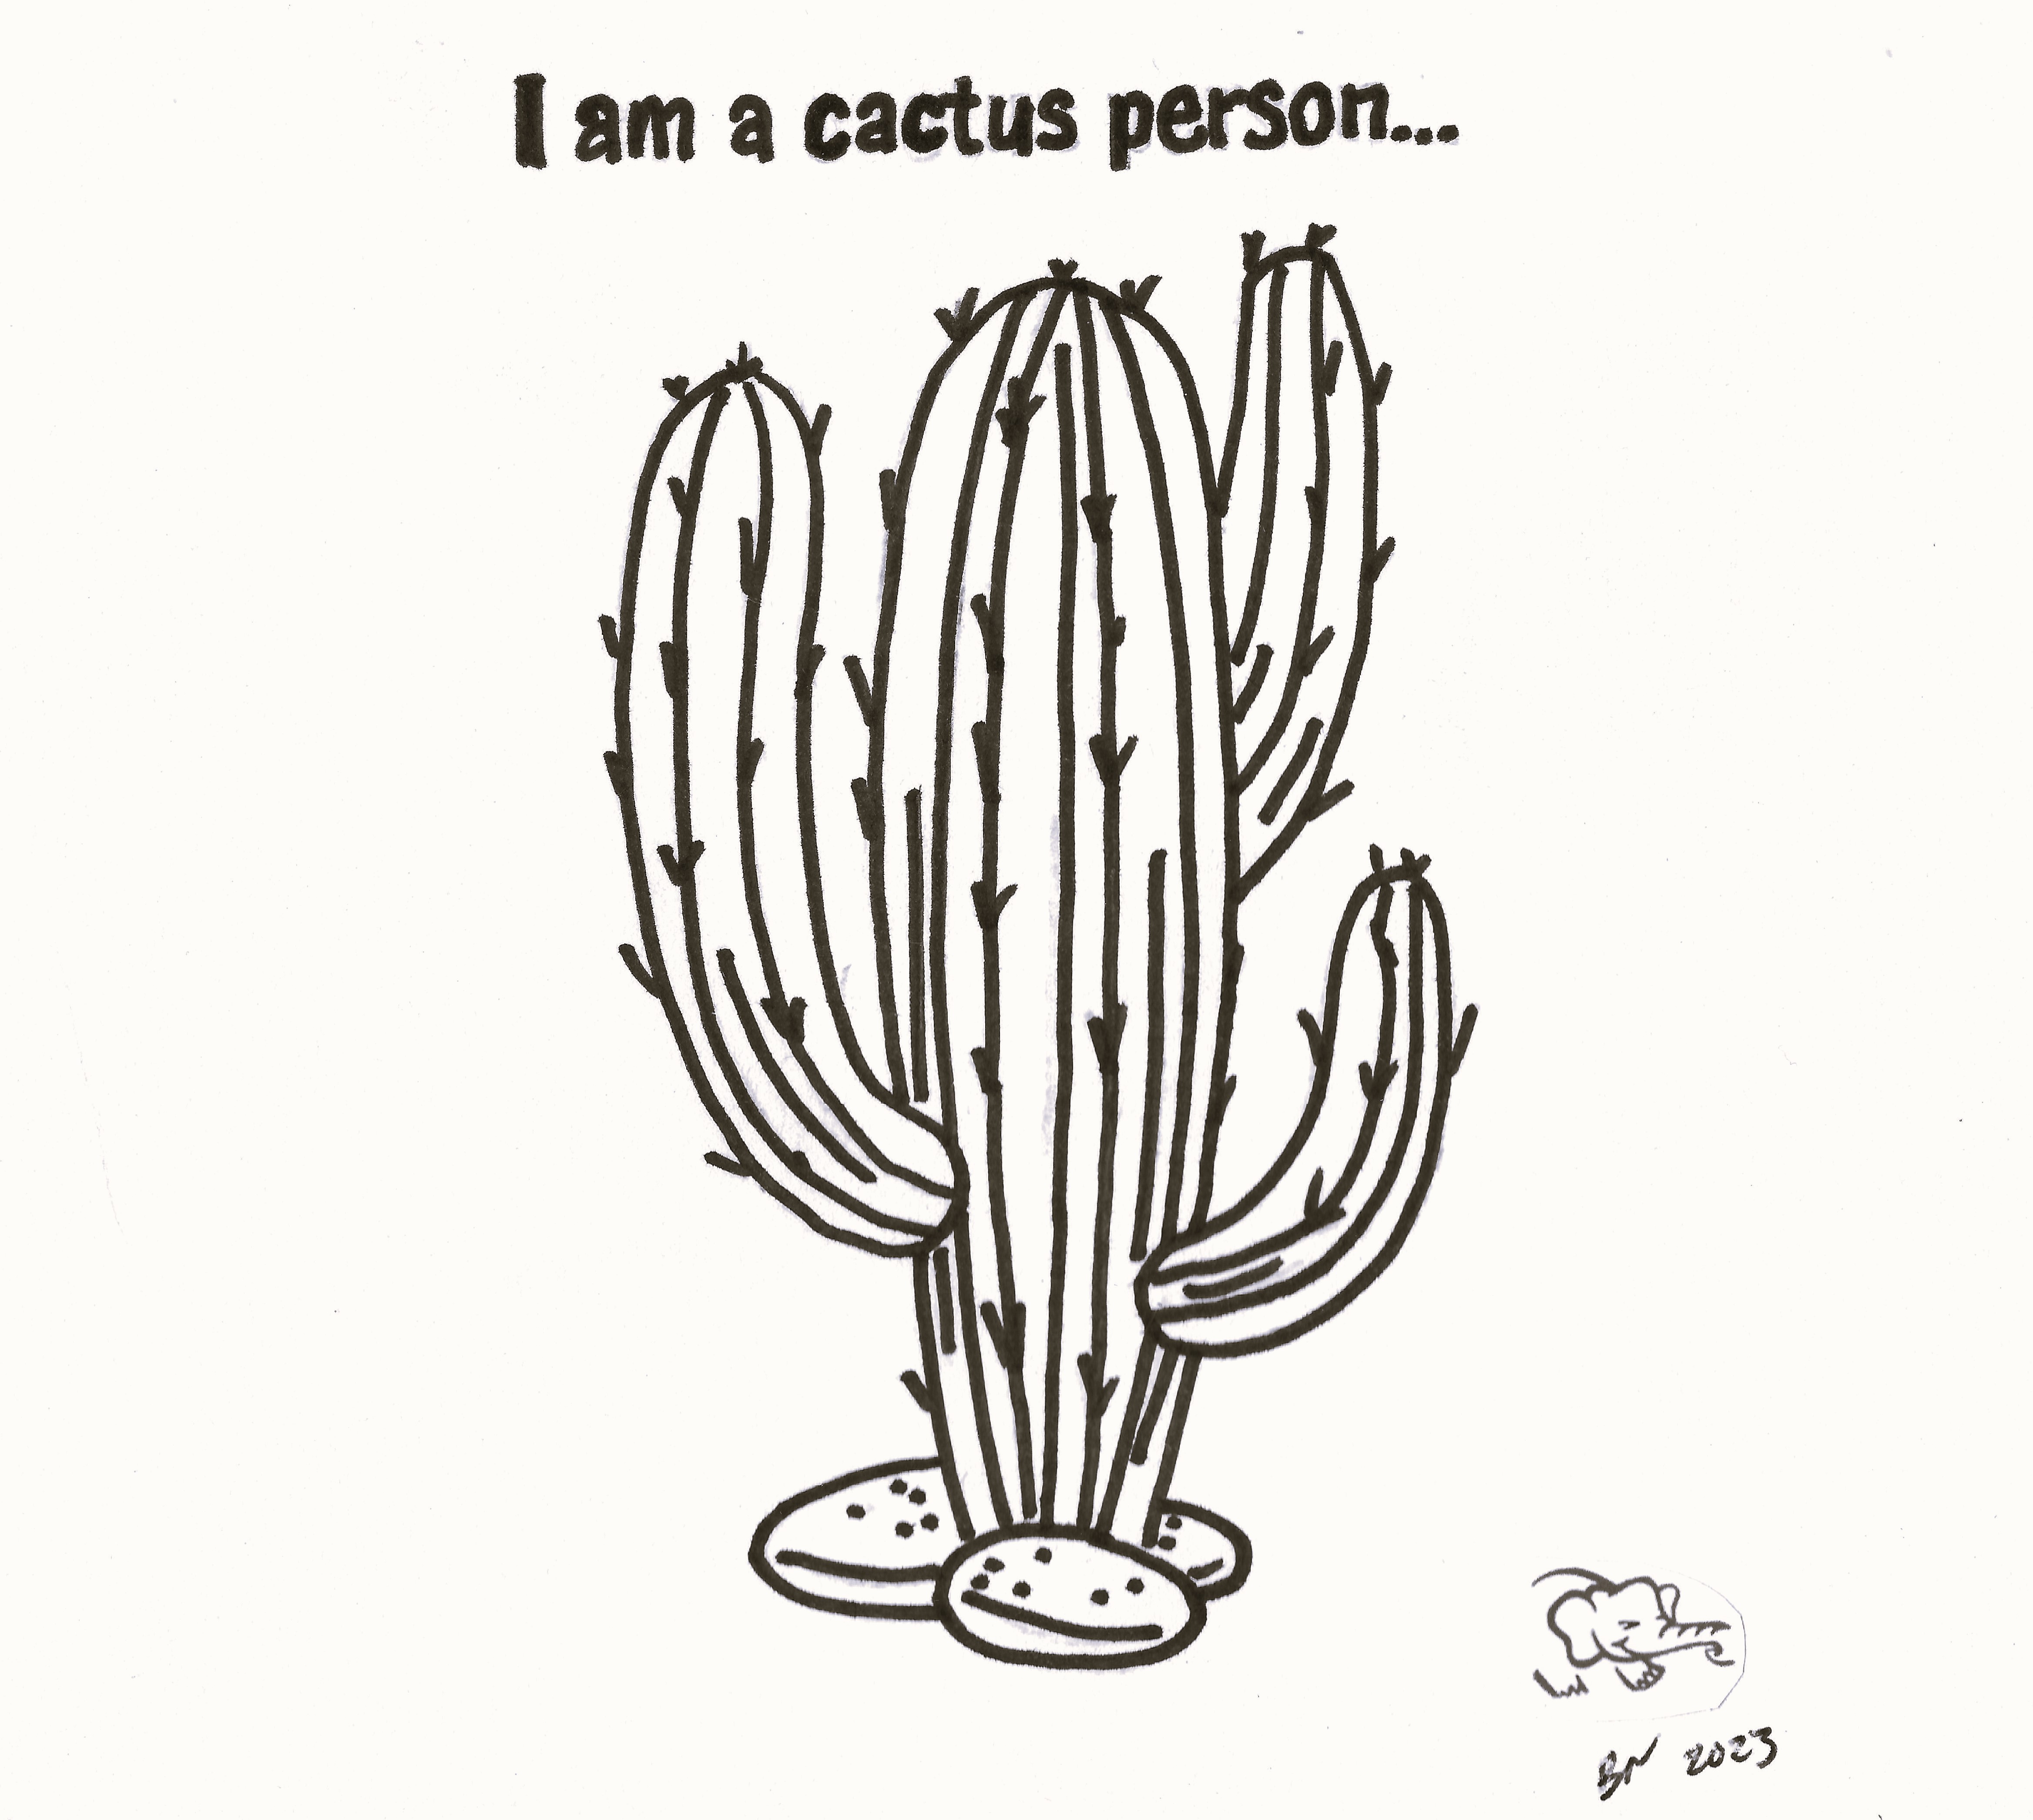 A Cactus Person Leads With Their Head and Tends to be Highly Logical